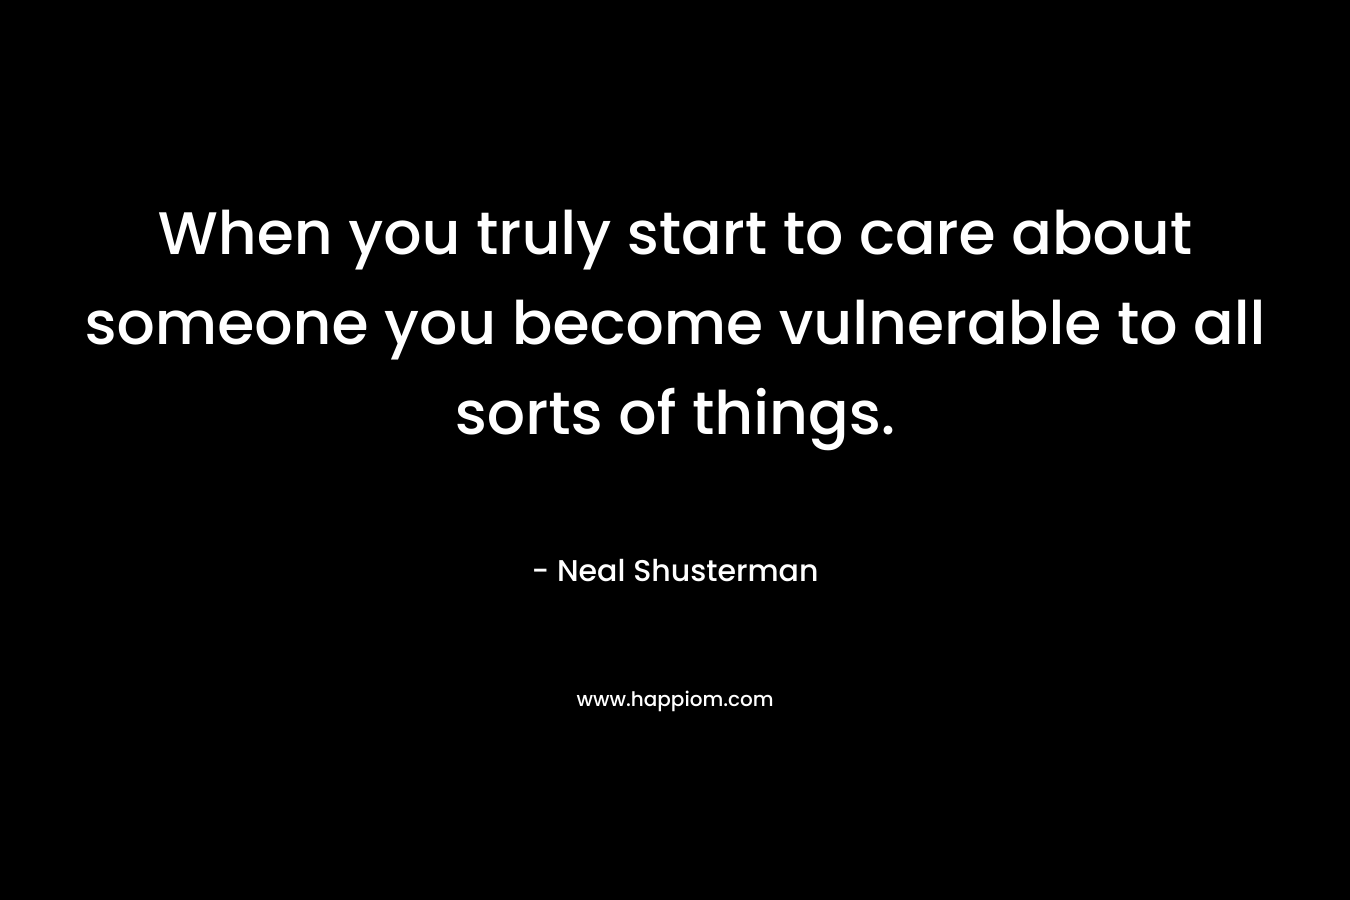 When you truly start to care about someone you become vulnerable to all sorts of things. – Neal Shusterman